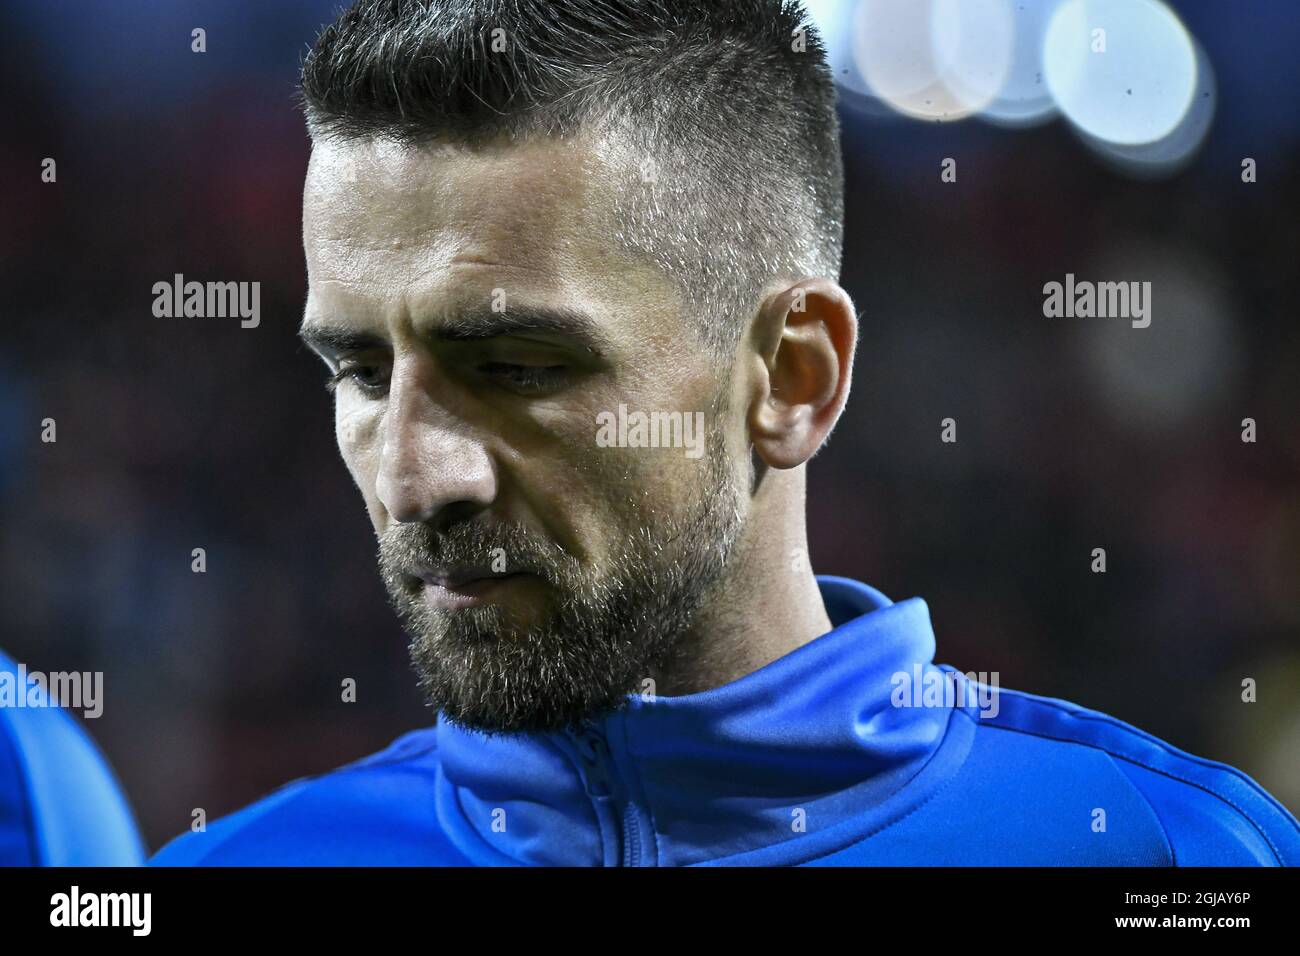 Hertha Berlin's Vedad Ibisevic ahead of the UEFA Europa League group J soccer match between Ostersunds FK and Hertha Berlin at Jamtkraft Arena in Ostersund, Sweden, on Sept. 28, 2017. Photo: Robert Henriksson / TT / code 11393  Stock Photo